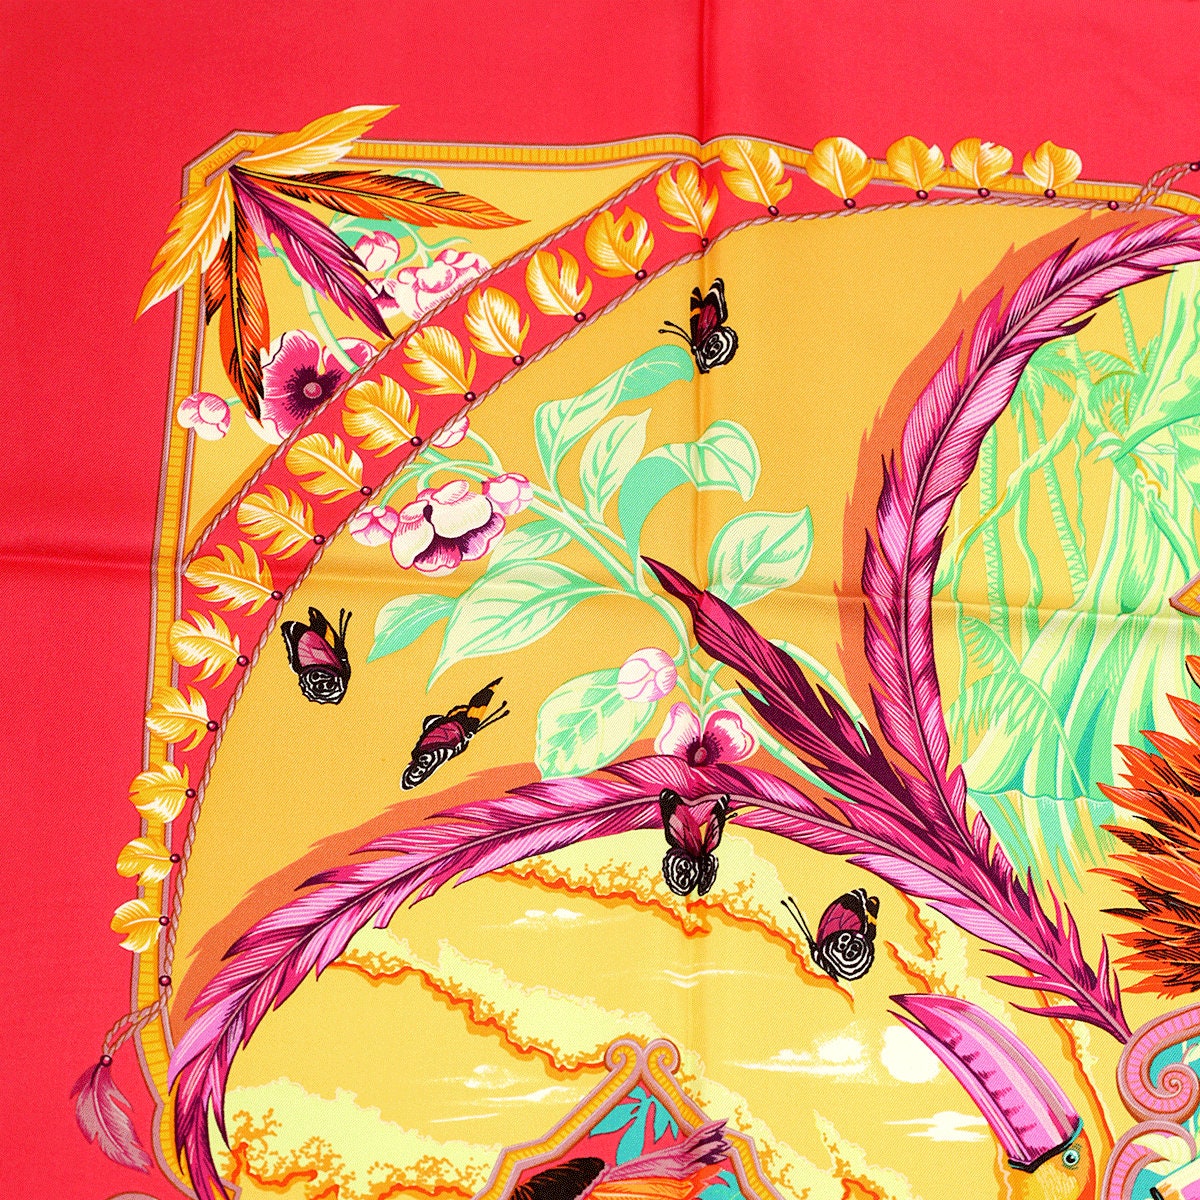 Hermes Scarf "Amazonia" by Laurence Bourthoumieux 90cm Silk | Carre Foulard